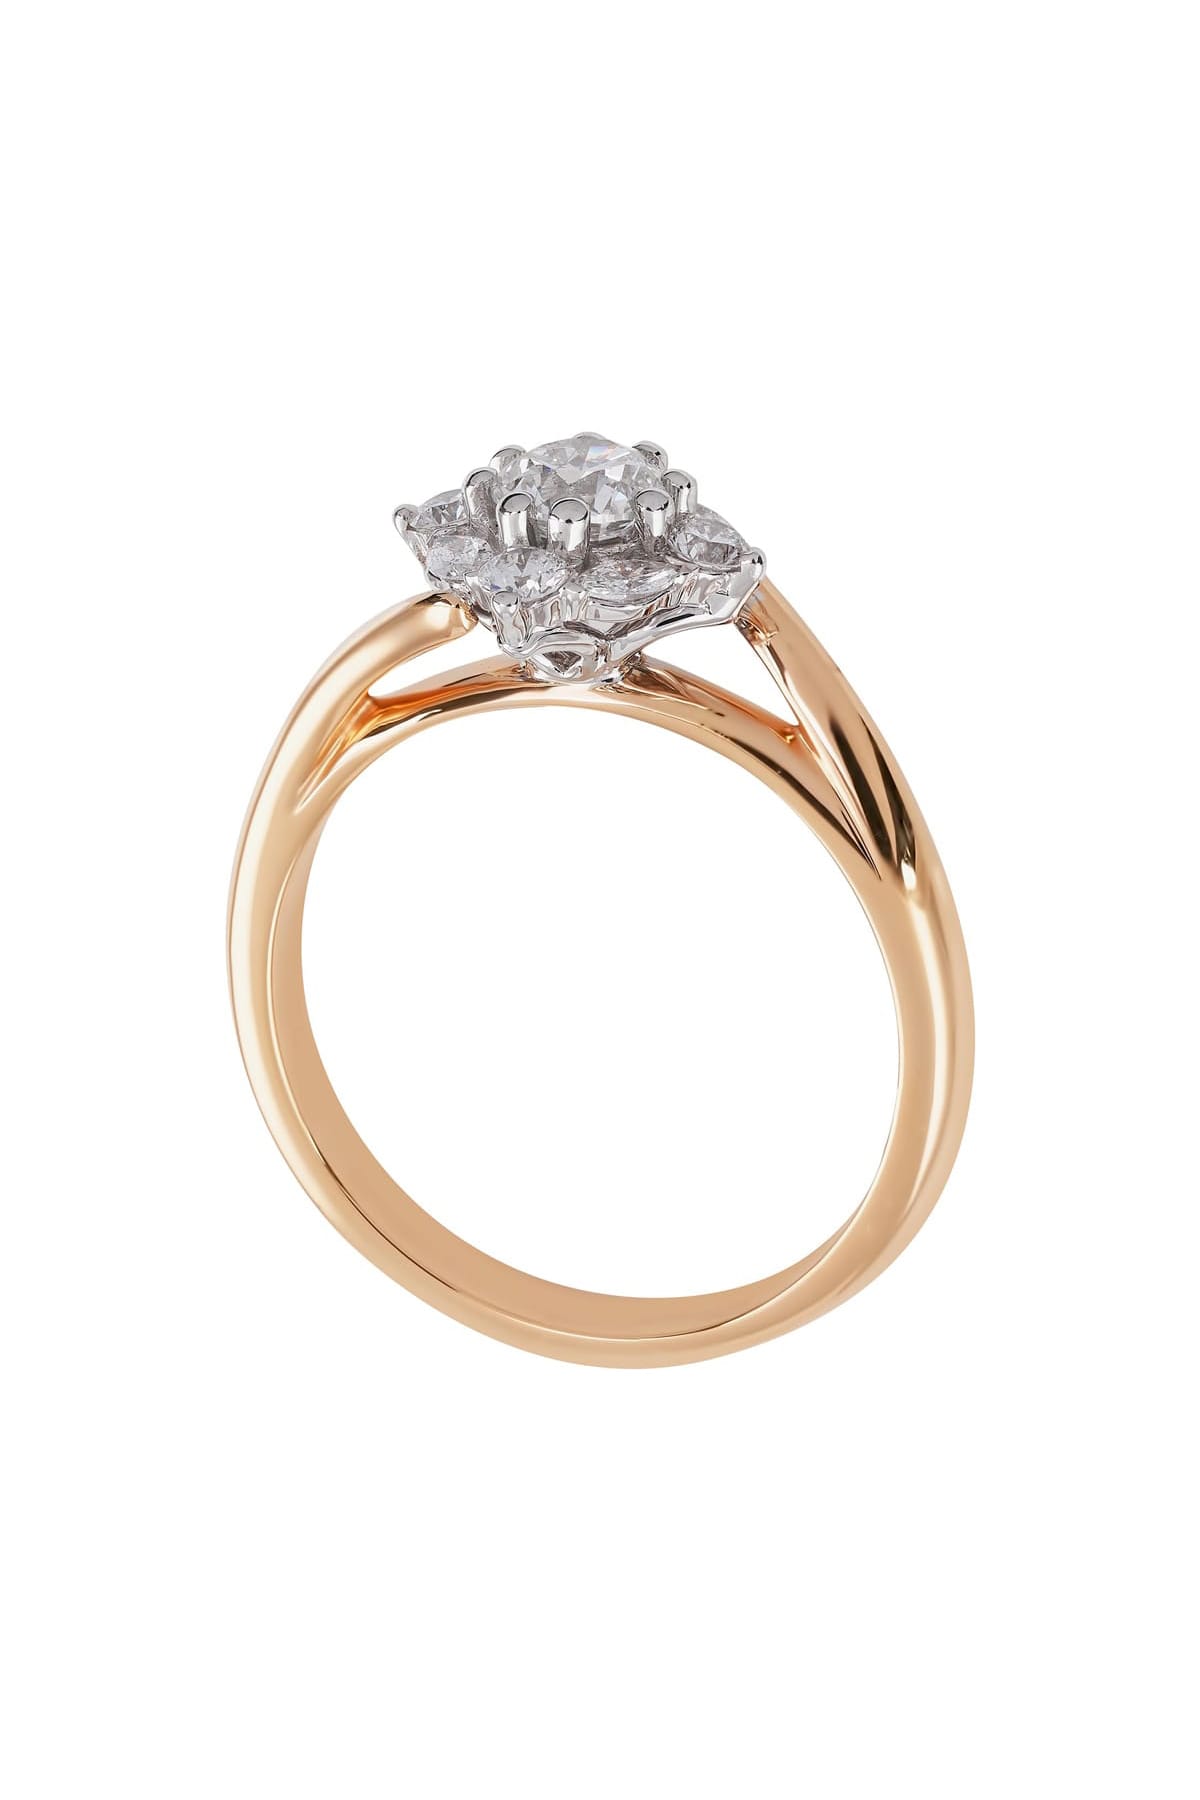 Marquise Ring set in Rose Gold available at LeGassick Diamonds and Jewellery Gold Coast, Australia.